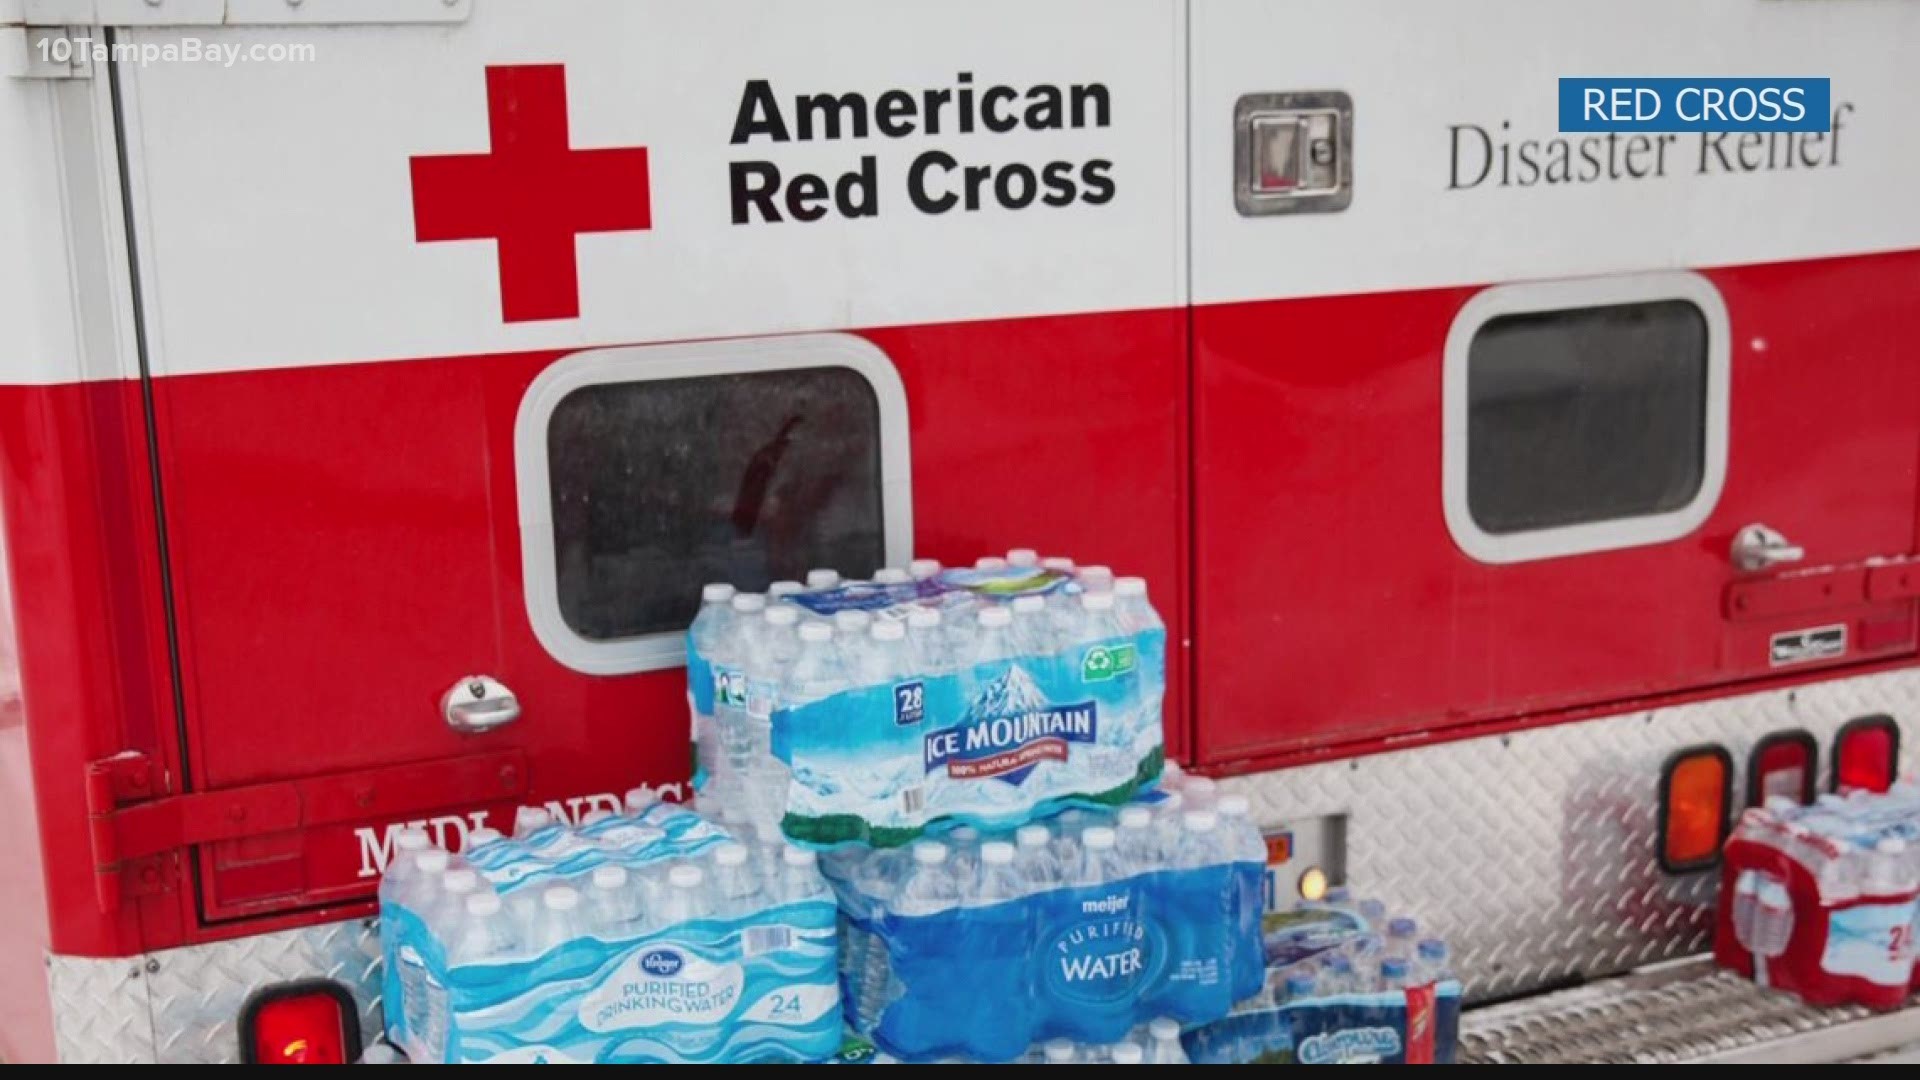 Yet another major storm is taking aim at the Gulf Coast, and as the American Red Cross of Tampa Bay prepares its disaster response